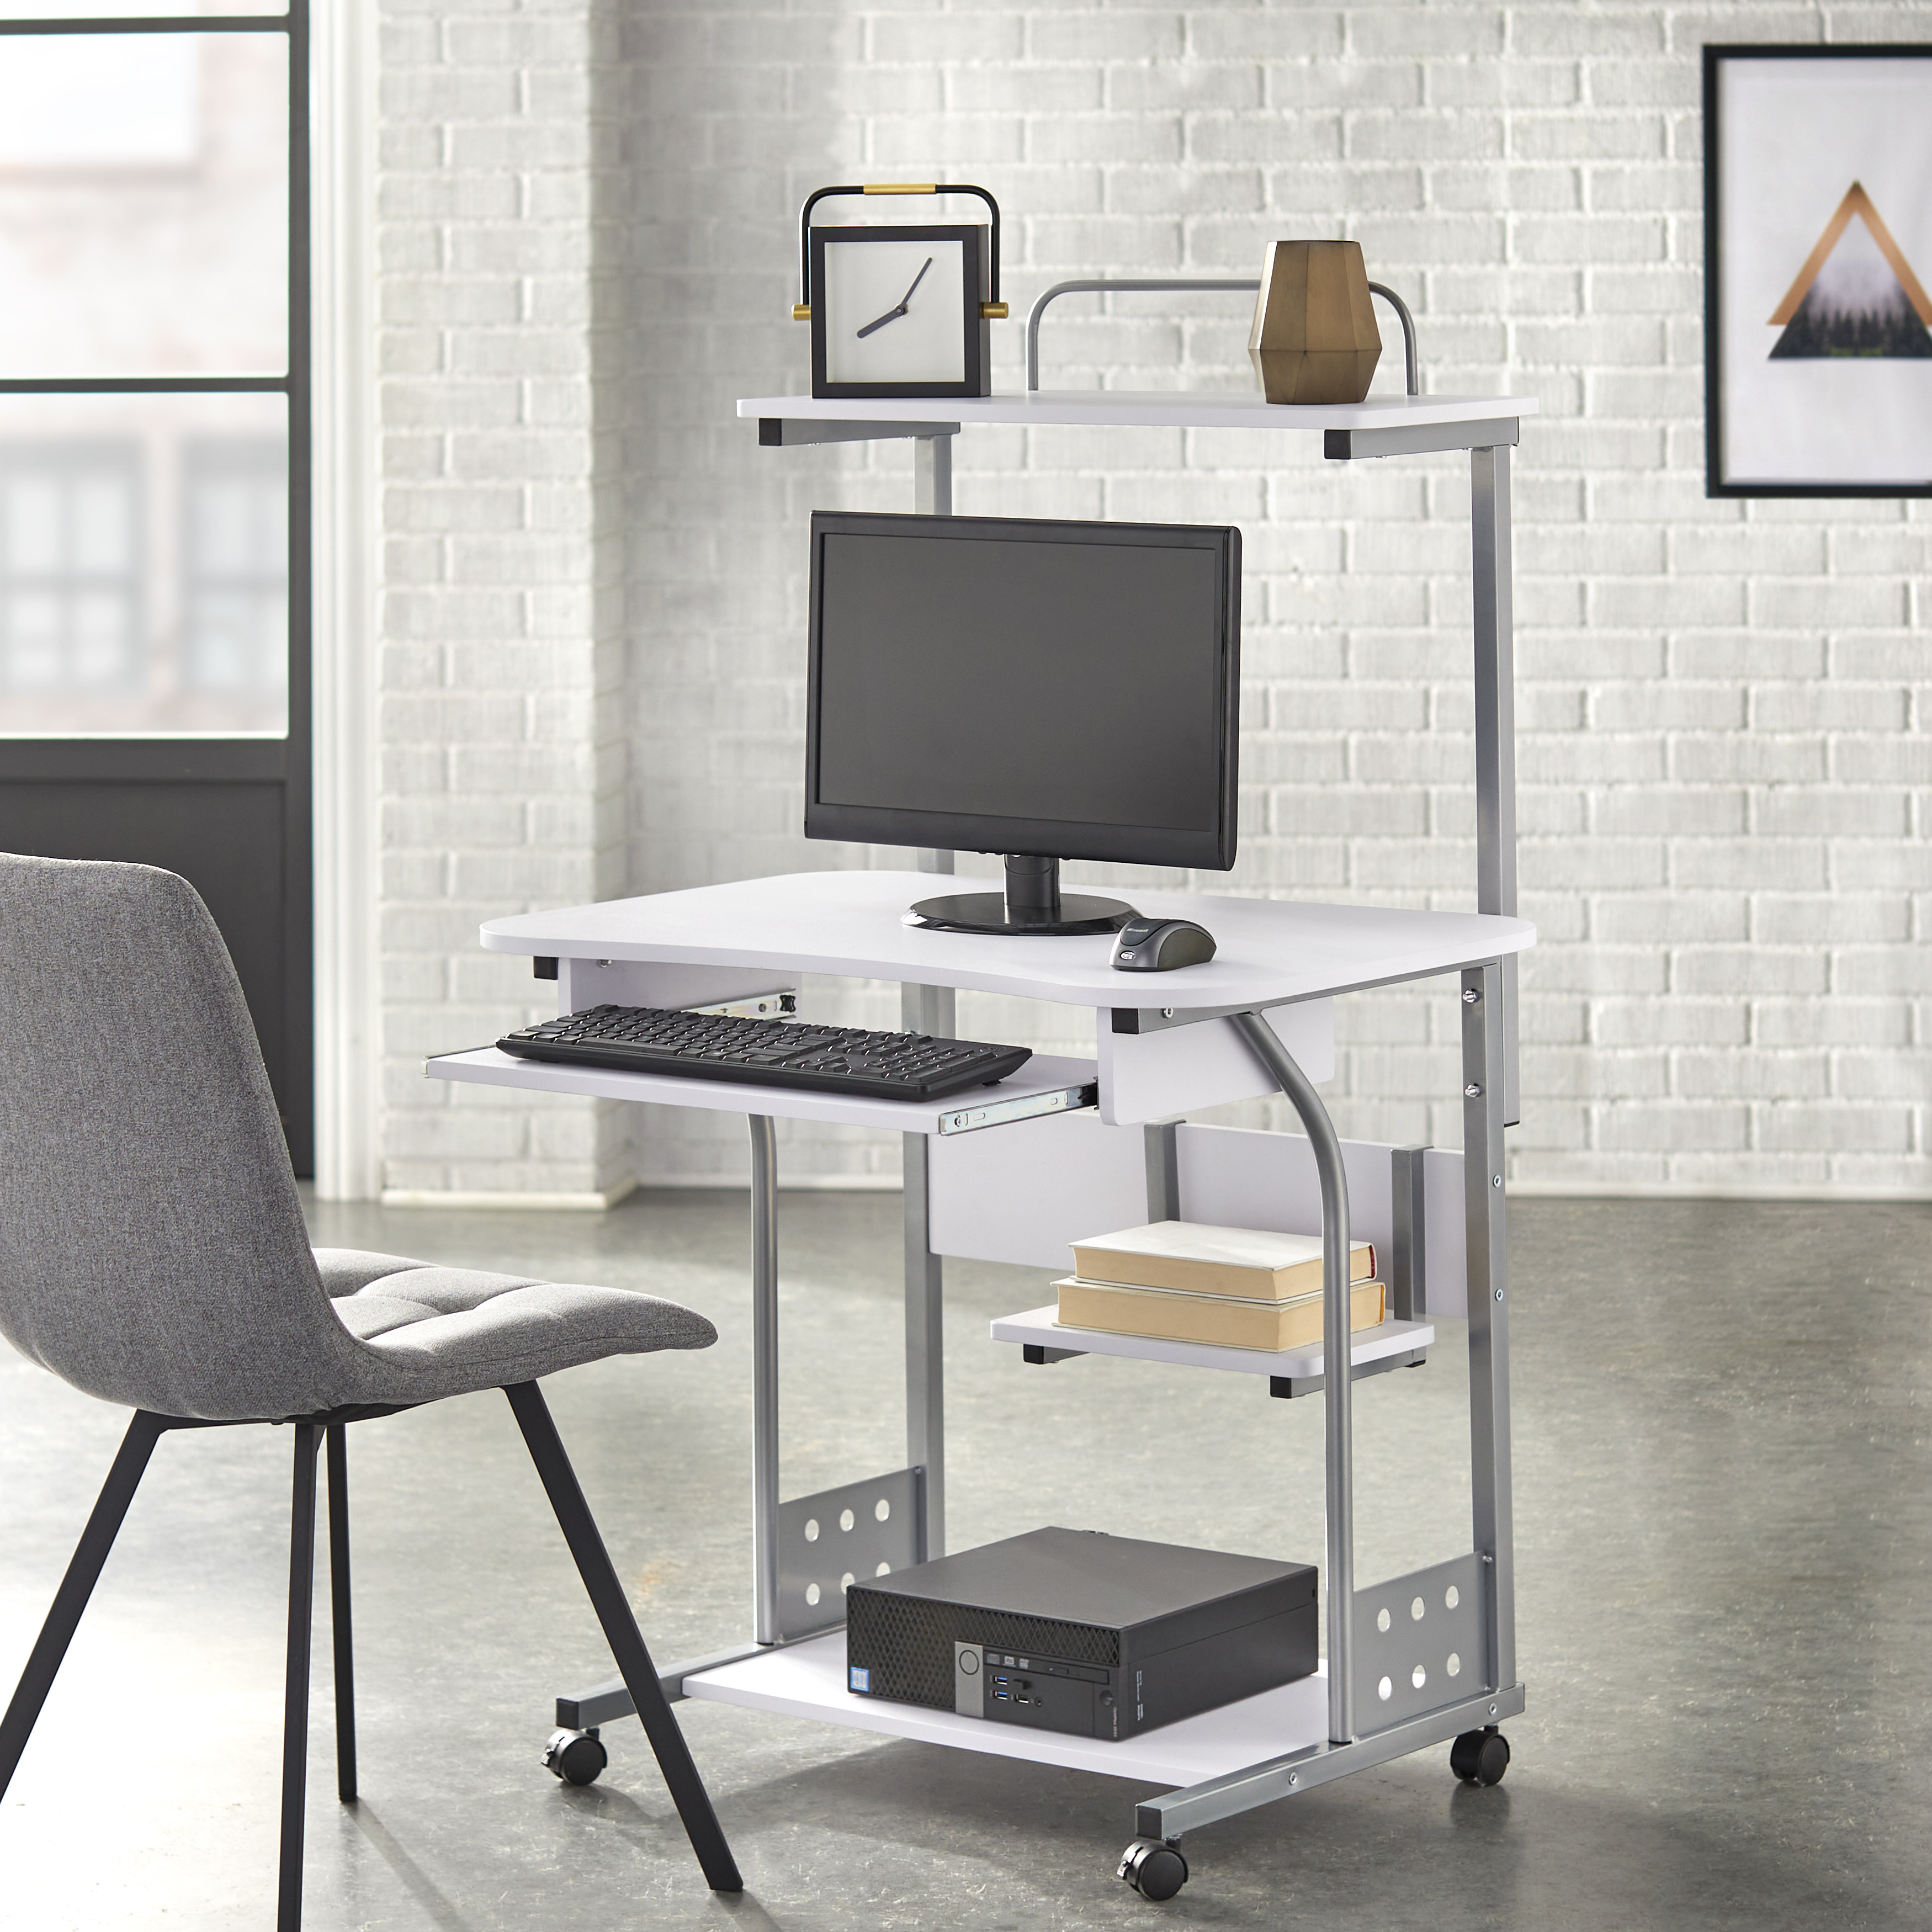 Buylateral Mobile Computer Tower Desk with Storage - image 4 of 4